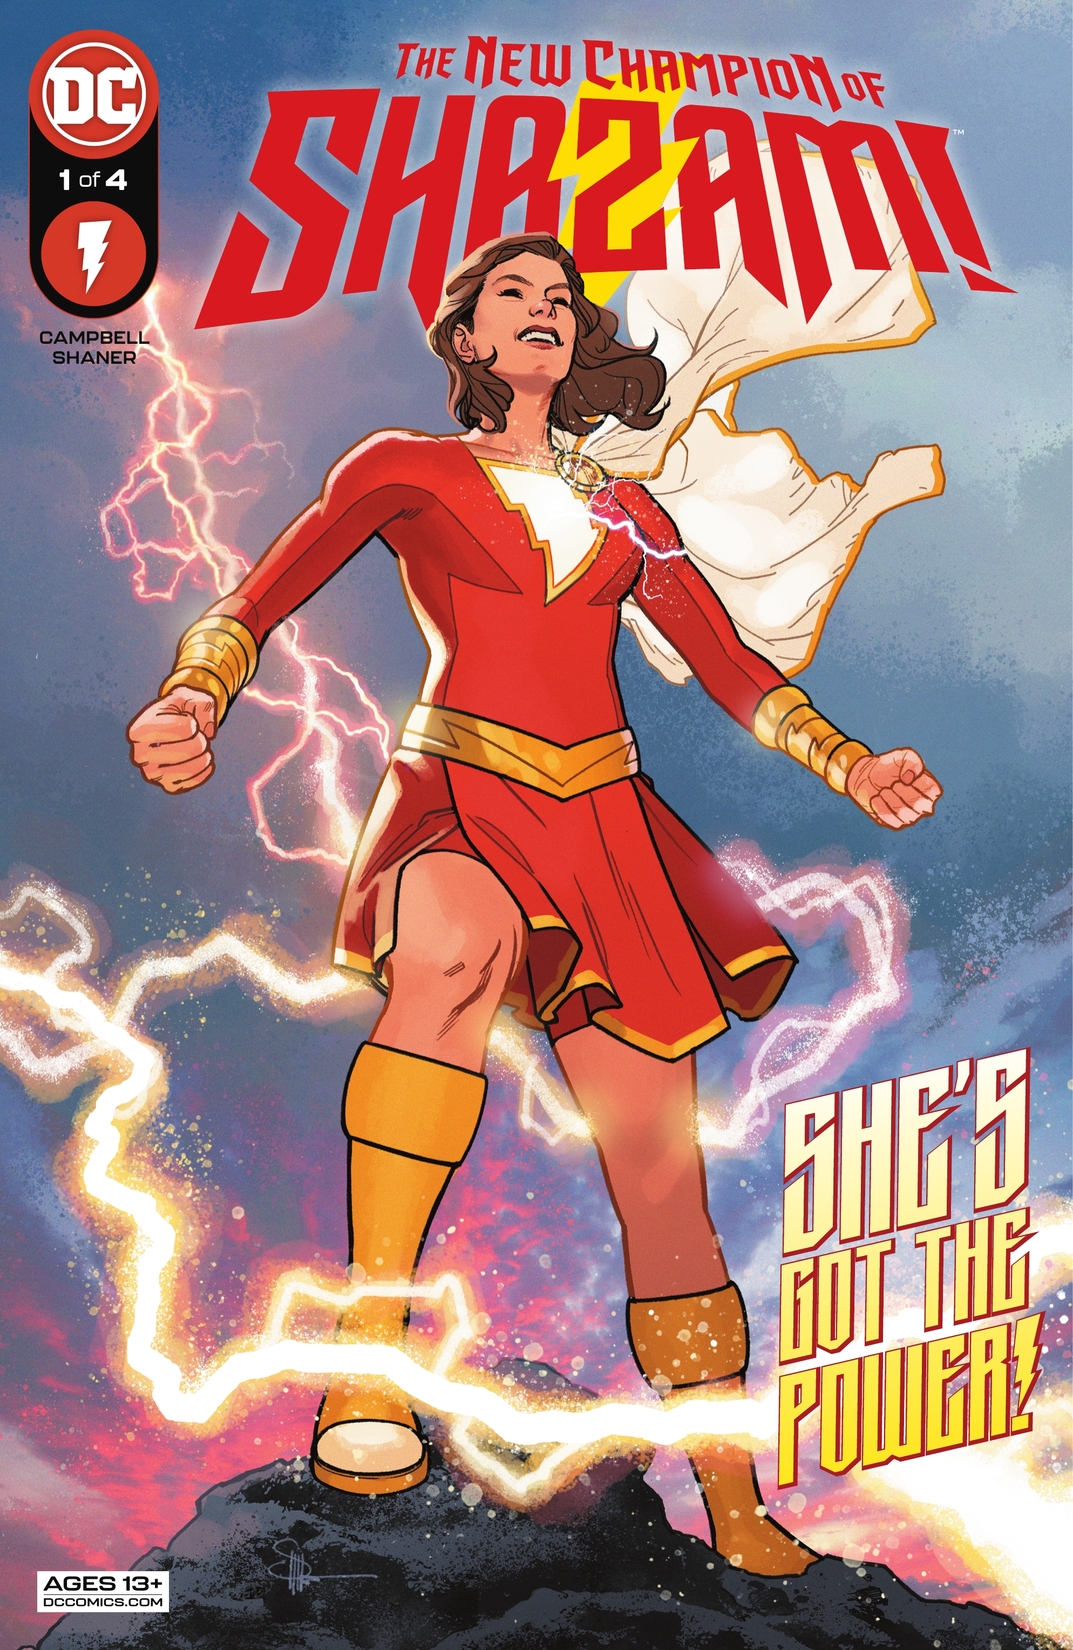 The New Champion of Shazam! #1 preview images